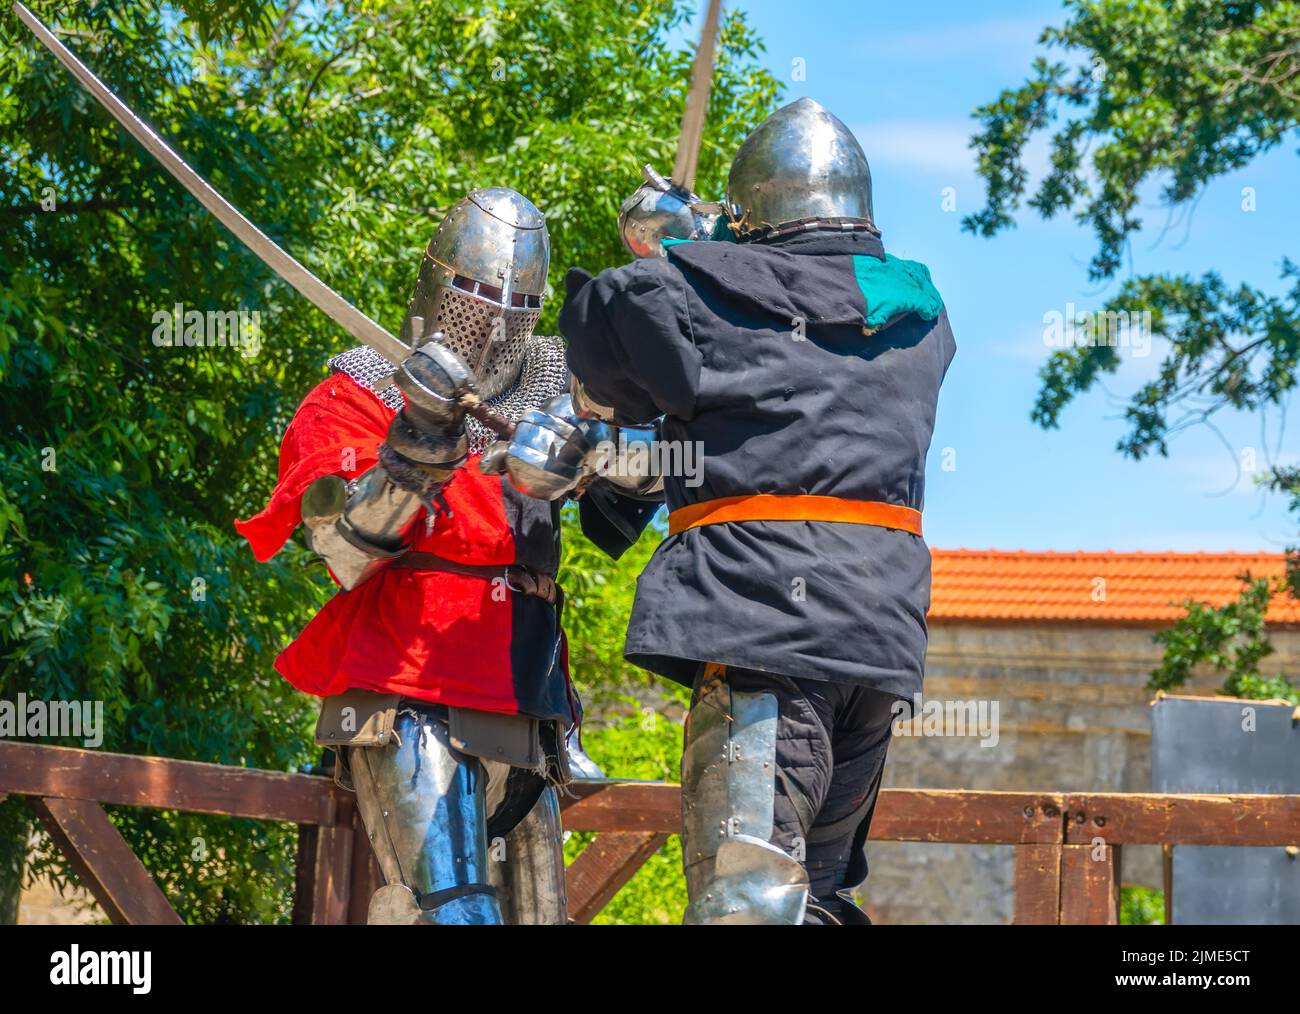 Two Medieval Soldiers Fighting on Swords Stock Photo